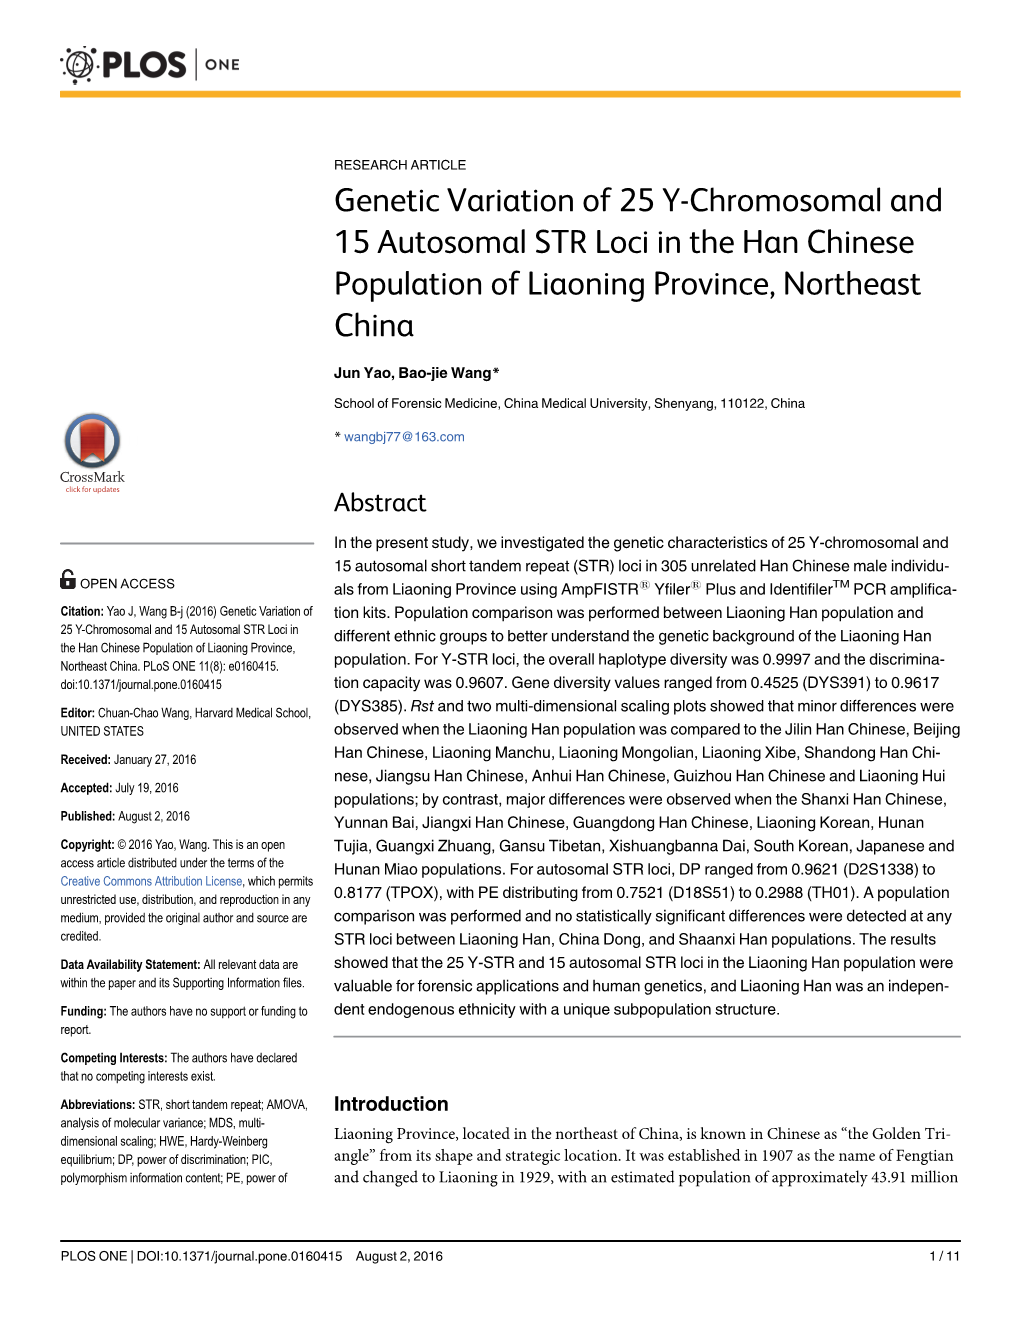 Genetic Variation of 25 Y-Chromosomal and 15 Autosomal STR Loci in the Han Chinese Population of Liaoning Province, Northeast China